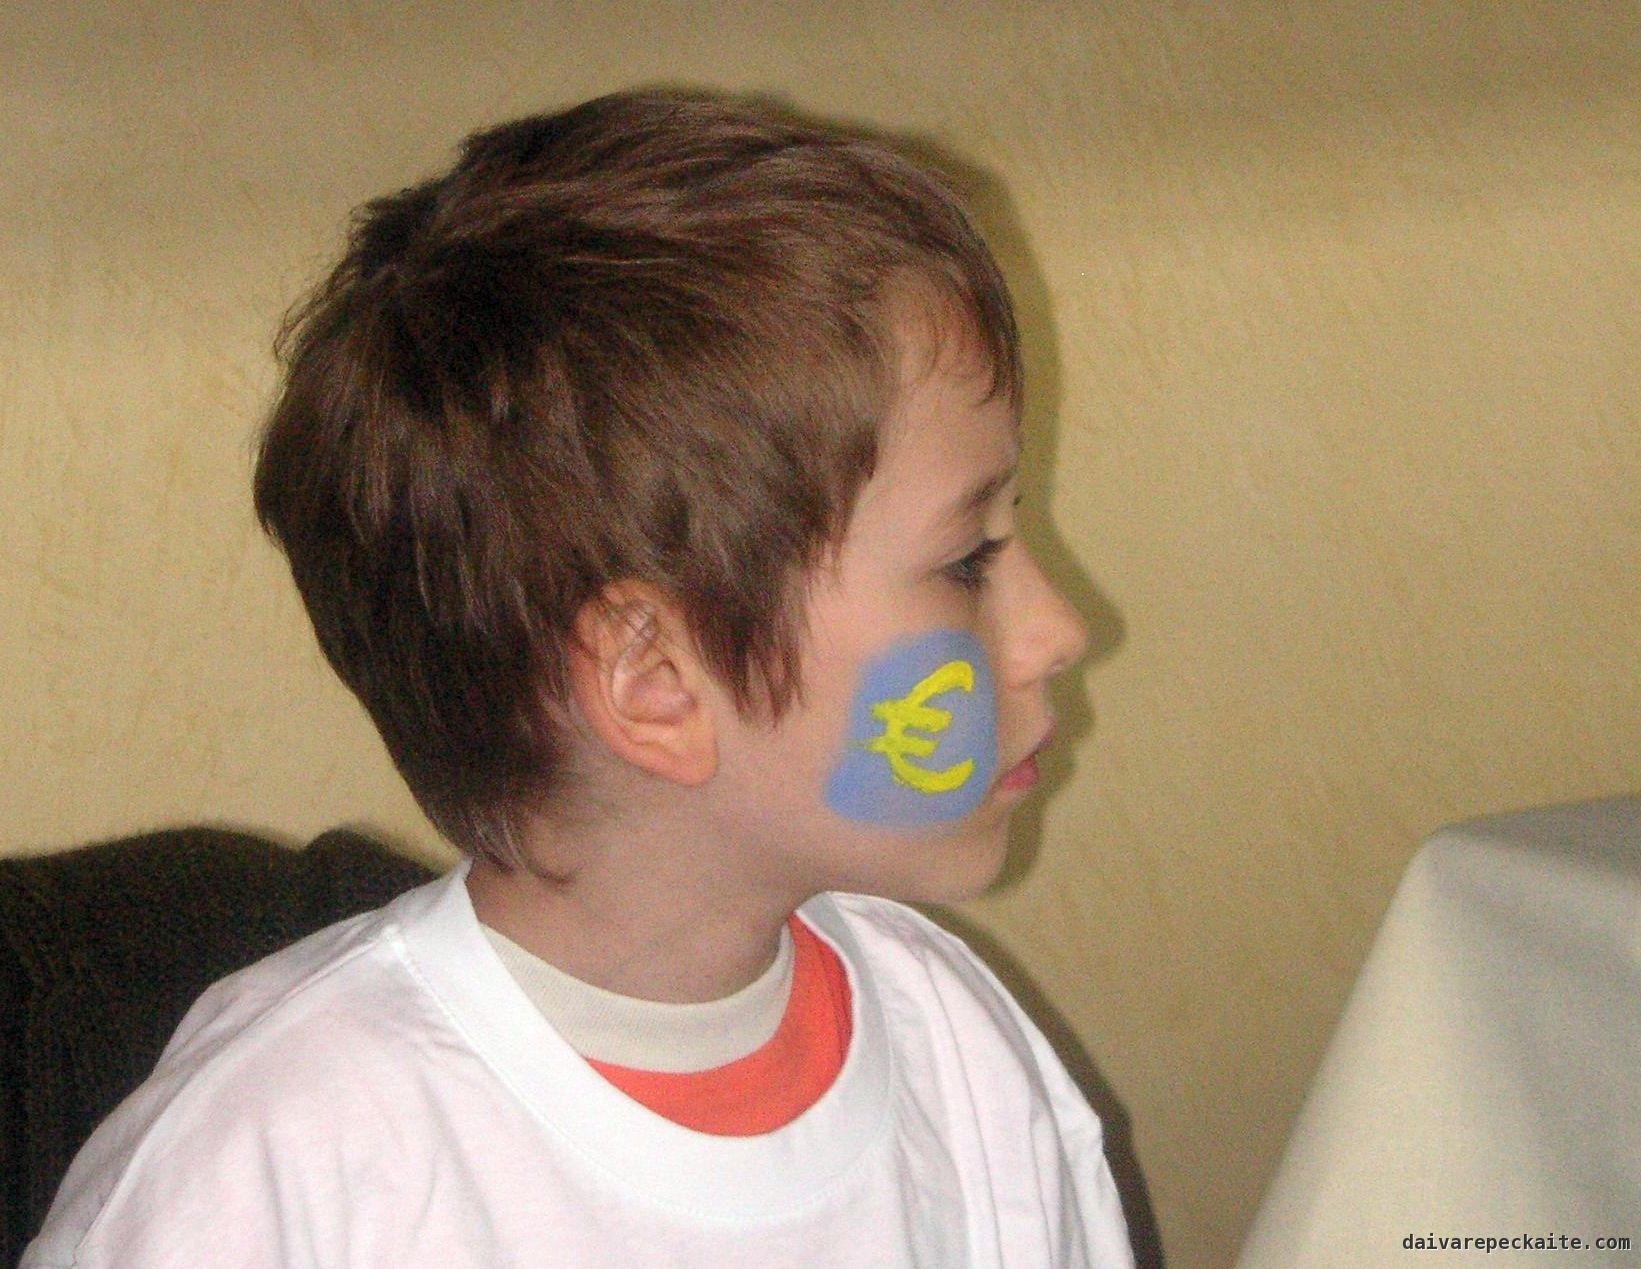 A young child with his face looking sideways and a large euro symbol painted on this cheek